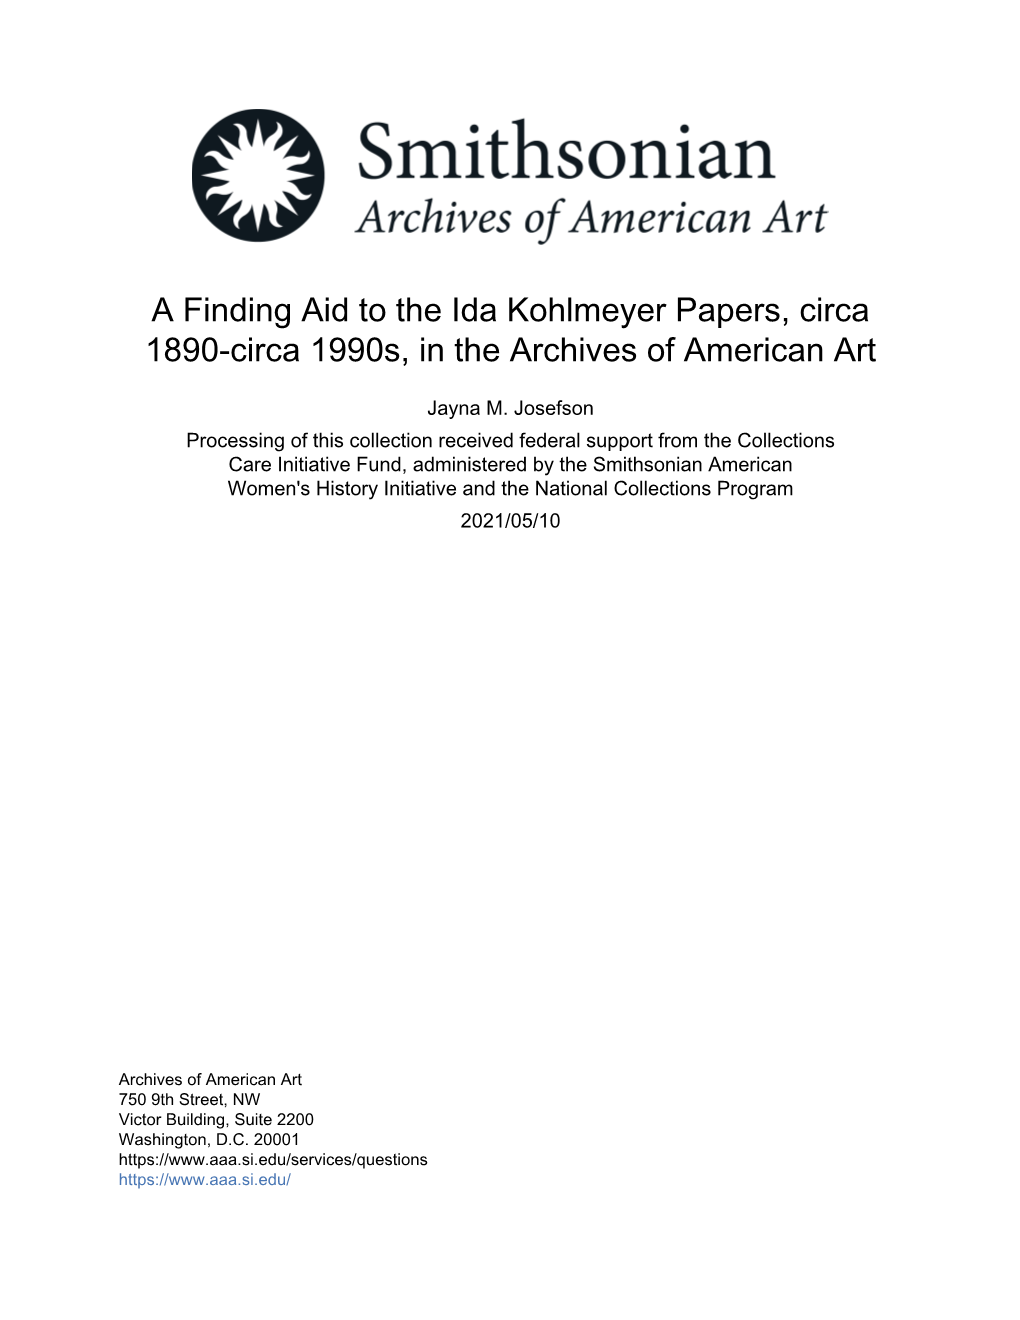 A Finding Aid to the Ida Kohlmeyer Papers, Circa 1890-Circa 1990S, in the Archives of American Art